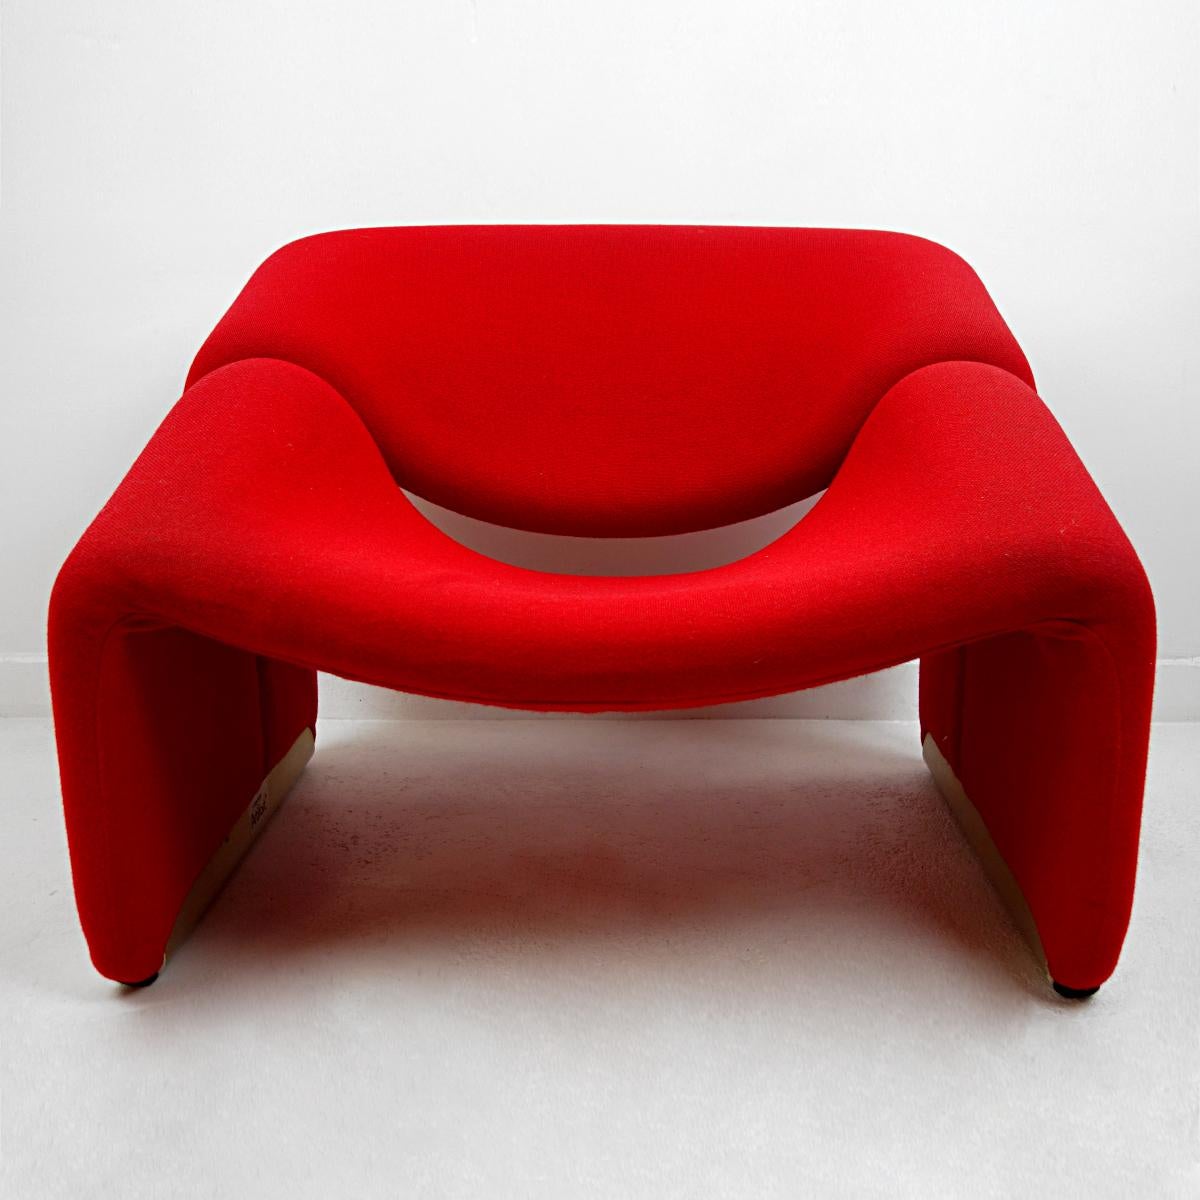 The groovy chair, or F598, was designed in 1973 by France’s top designer Pierre Paulin for Holland’s most Avant Garde furniture maker Artifort. Their compactness combined with great comfort and of course iconic looks made this chair one of the stars